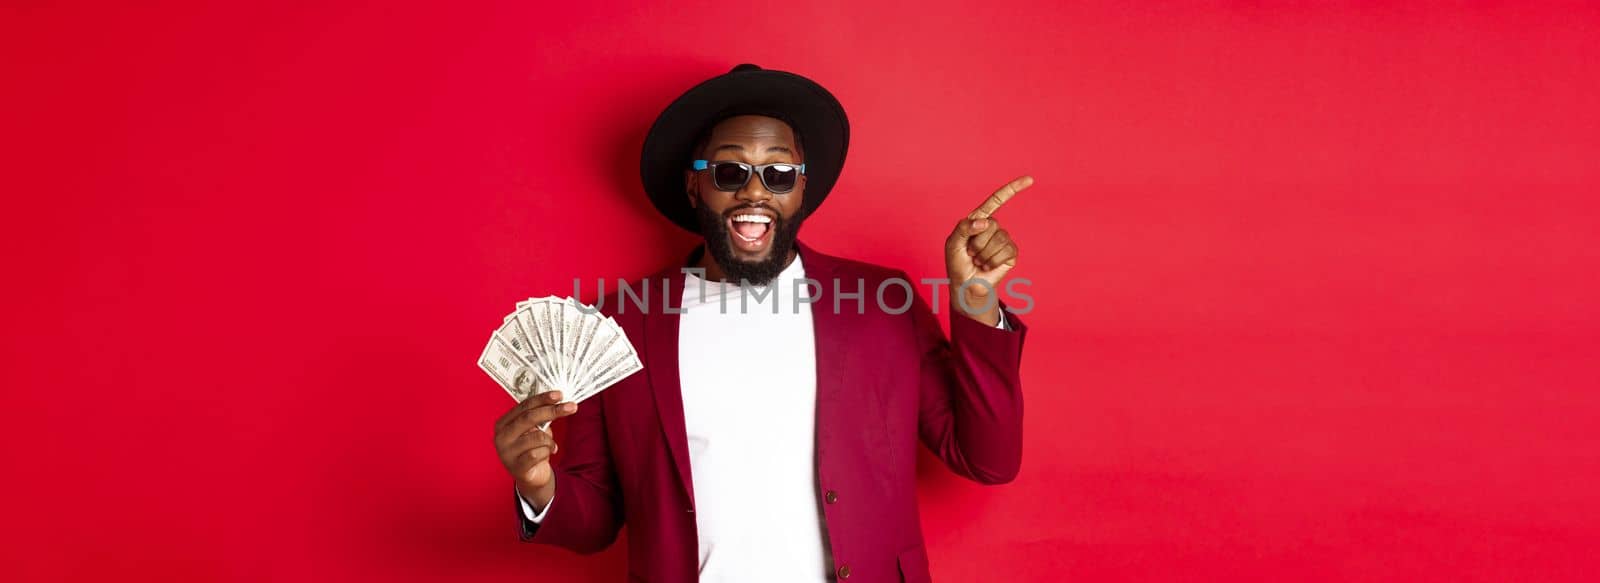 Handsome and stylish Black man pointing fingers left while showing money, holding dollars and demonstrating logo, standing over red background.